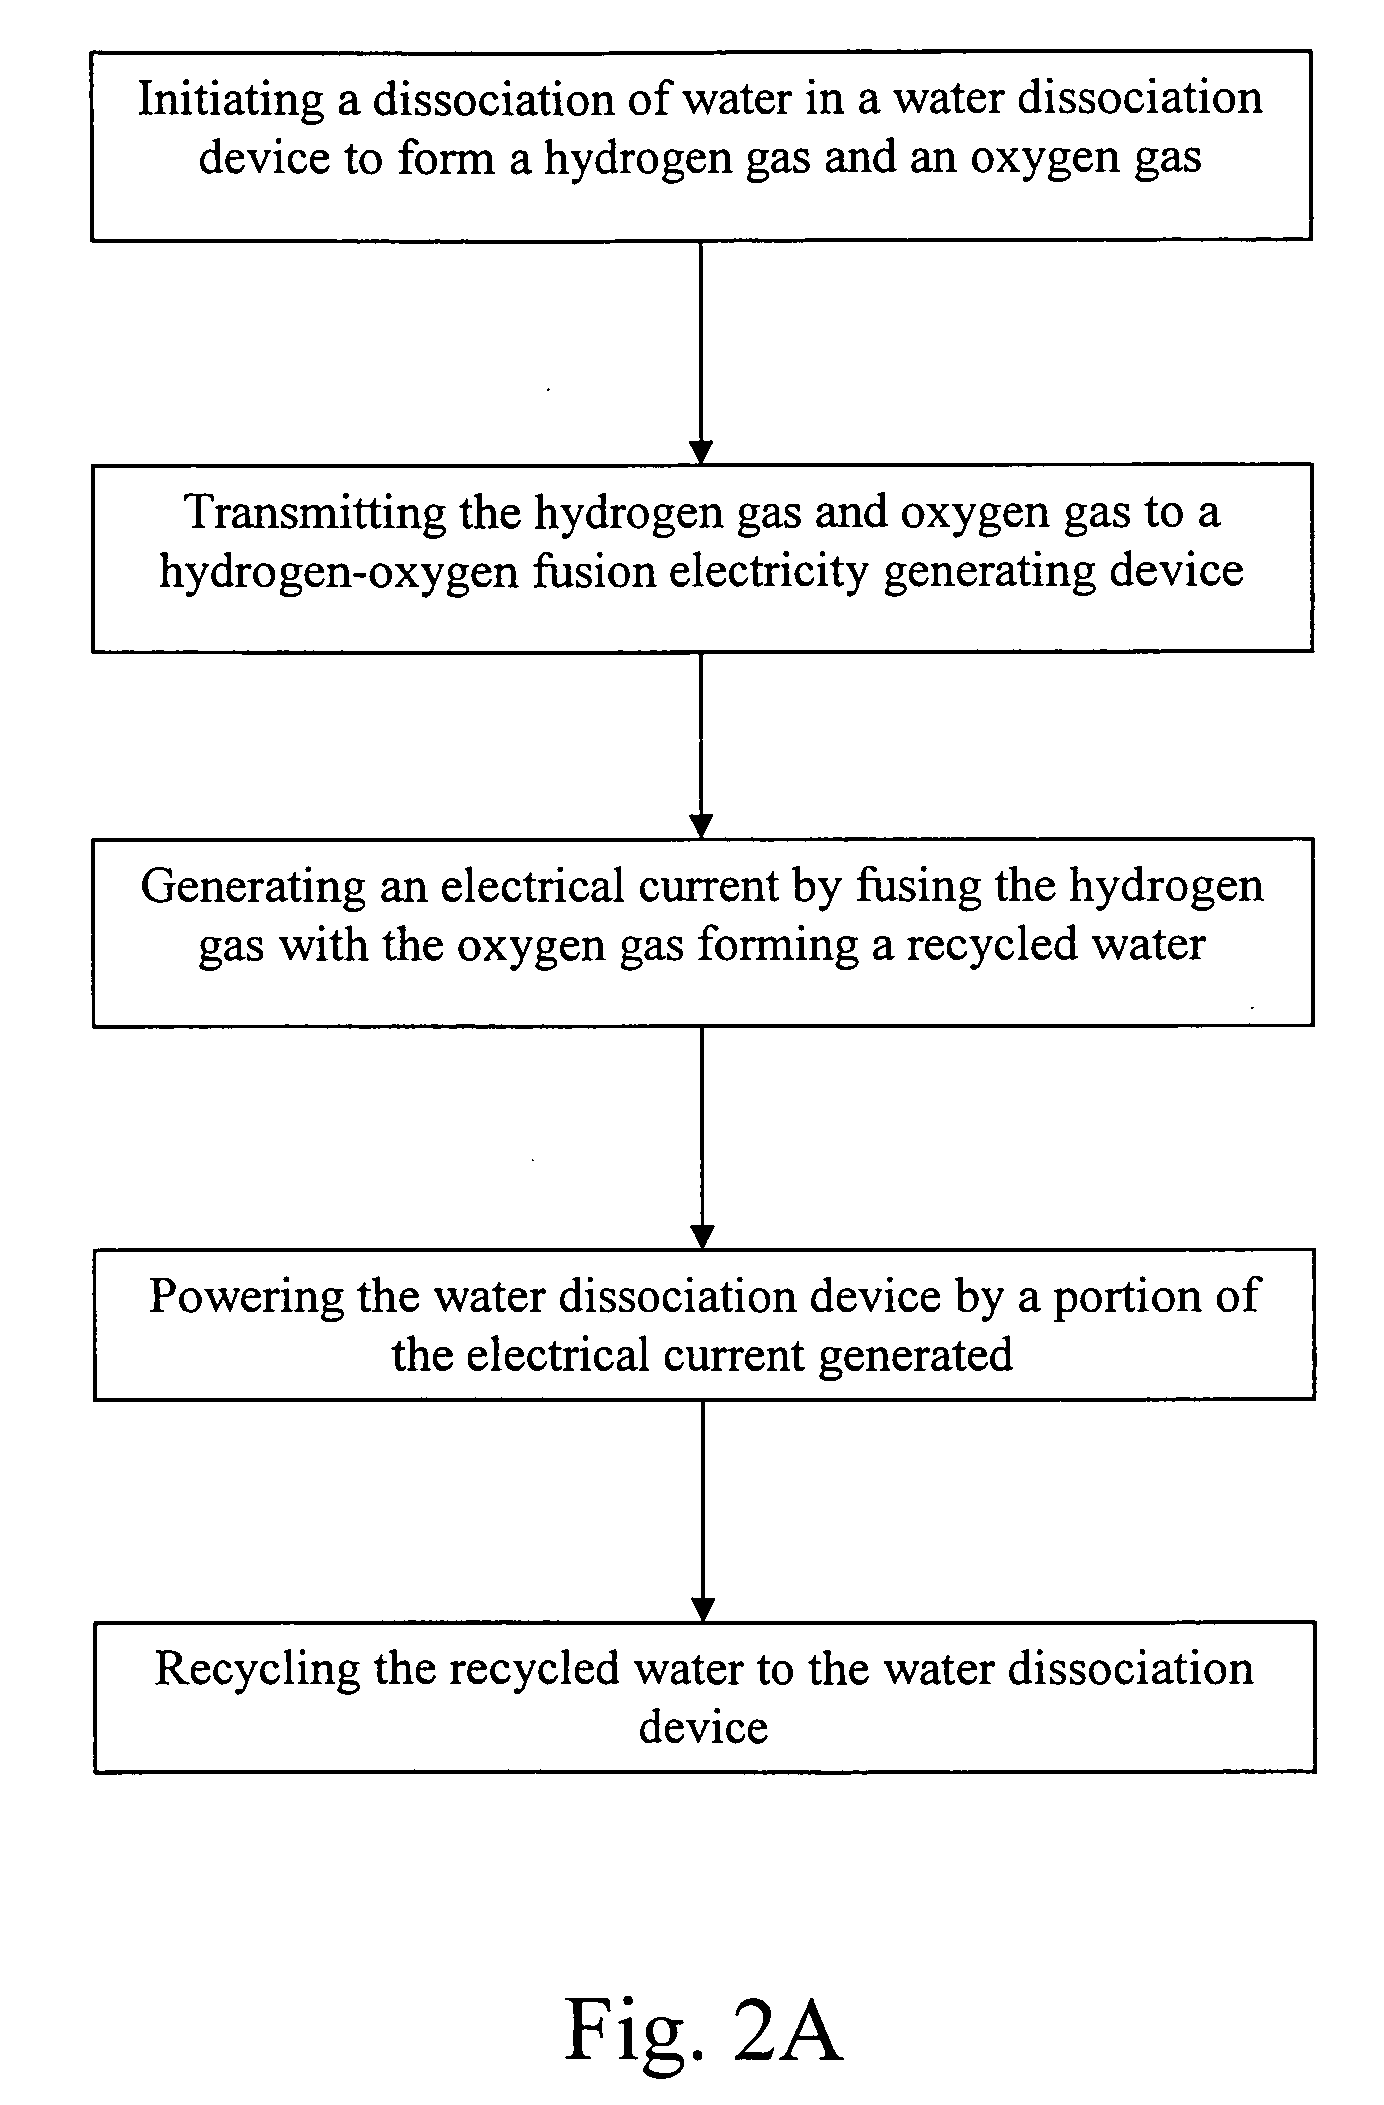 Inverse recycle power system